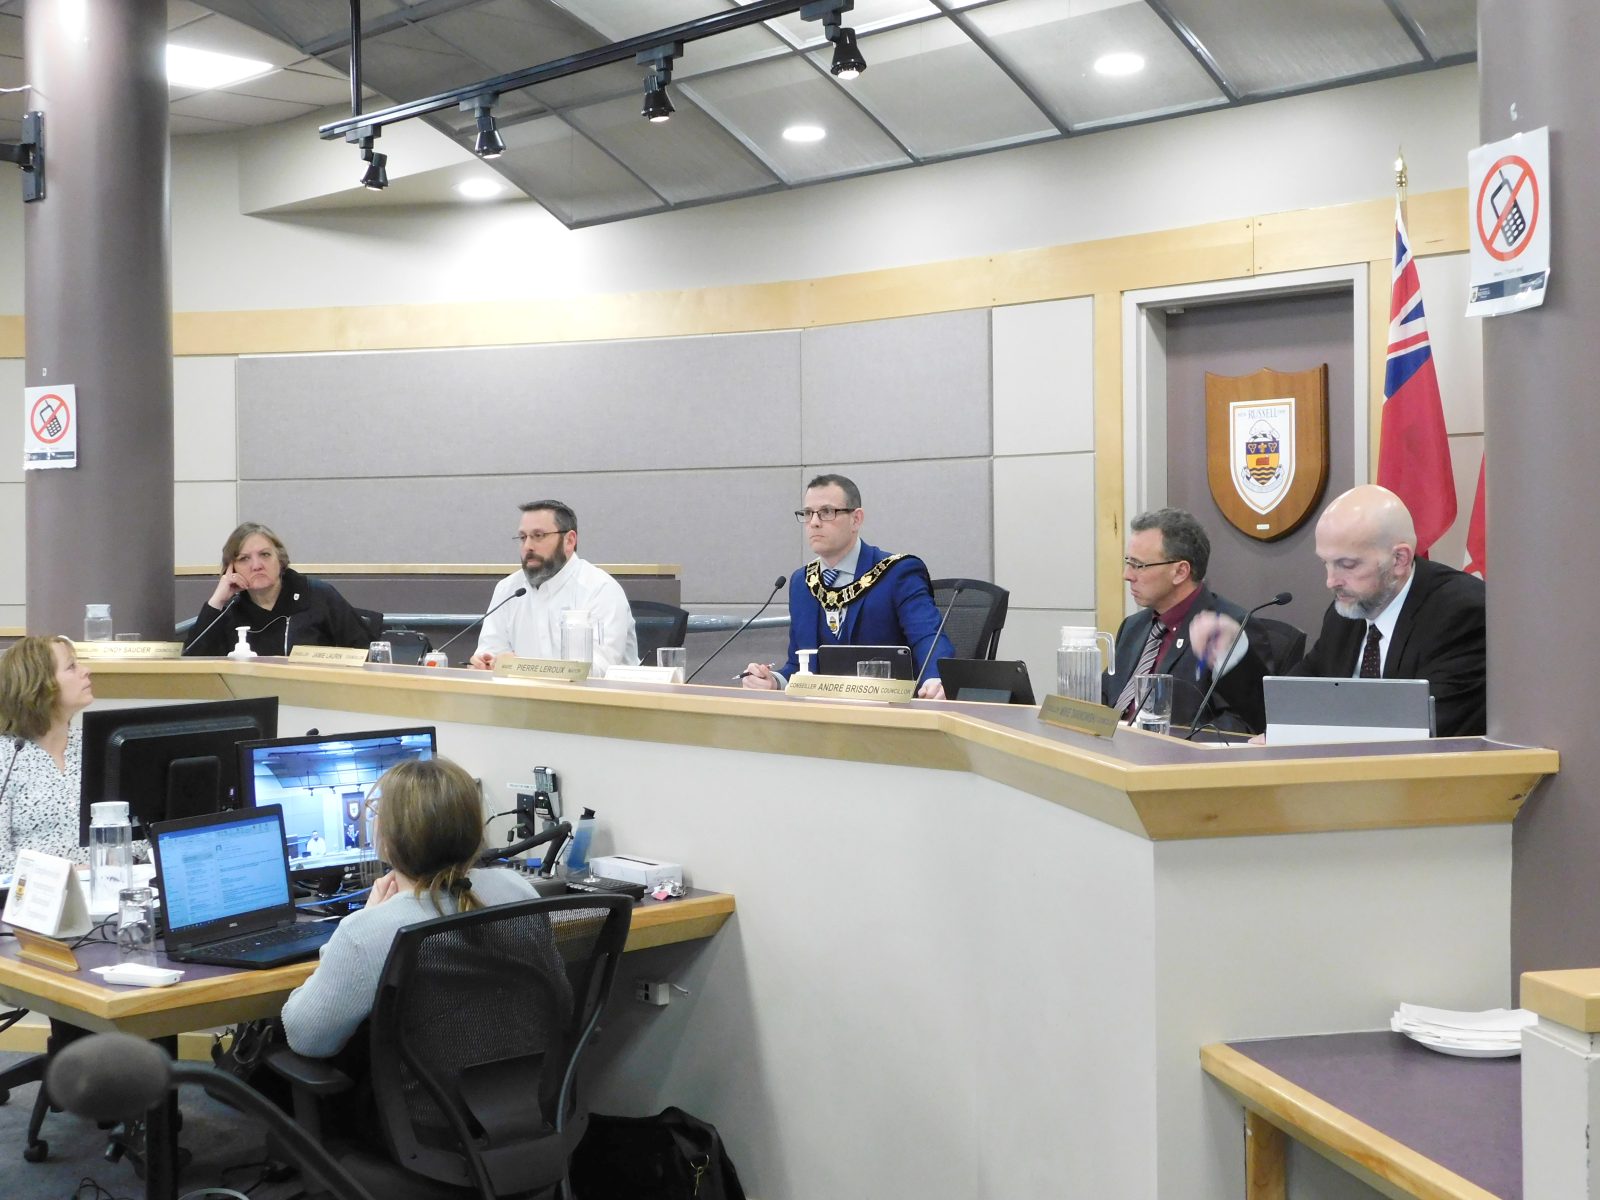 Township council reviews rules for meeting attendance